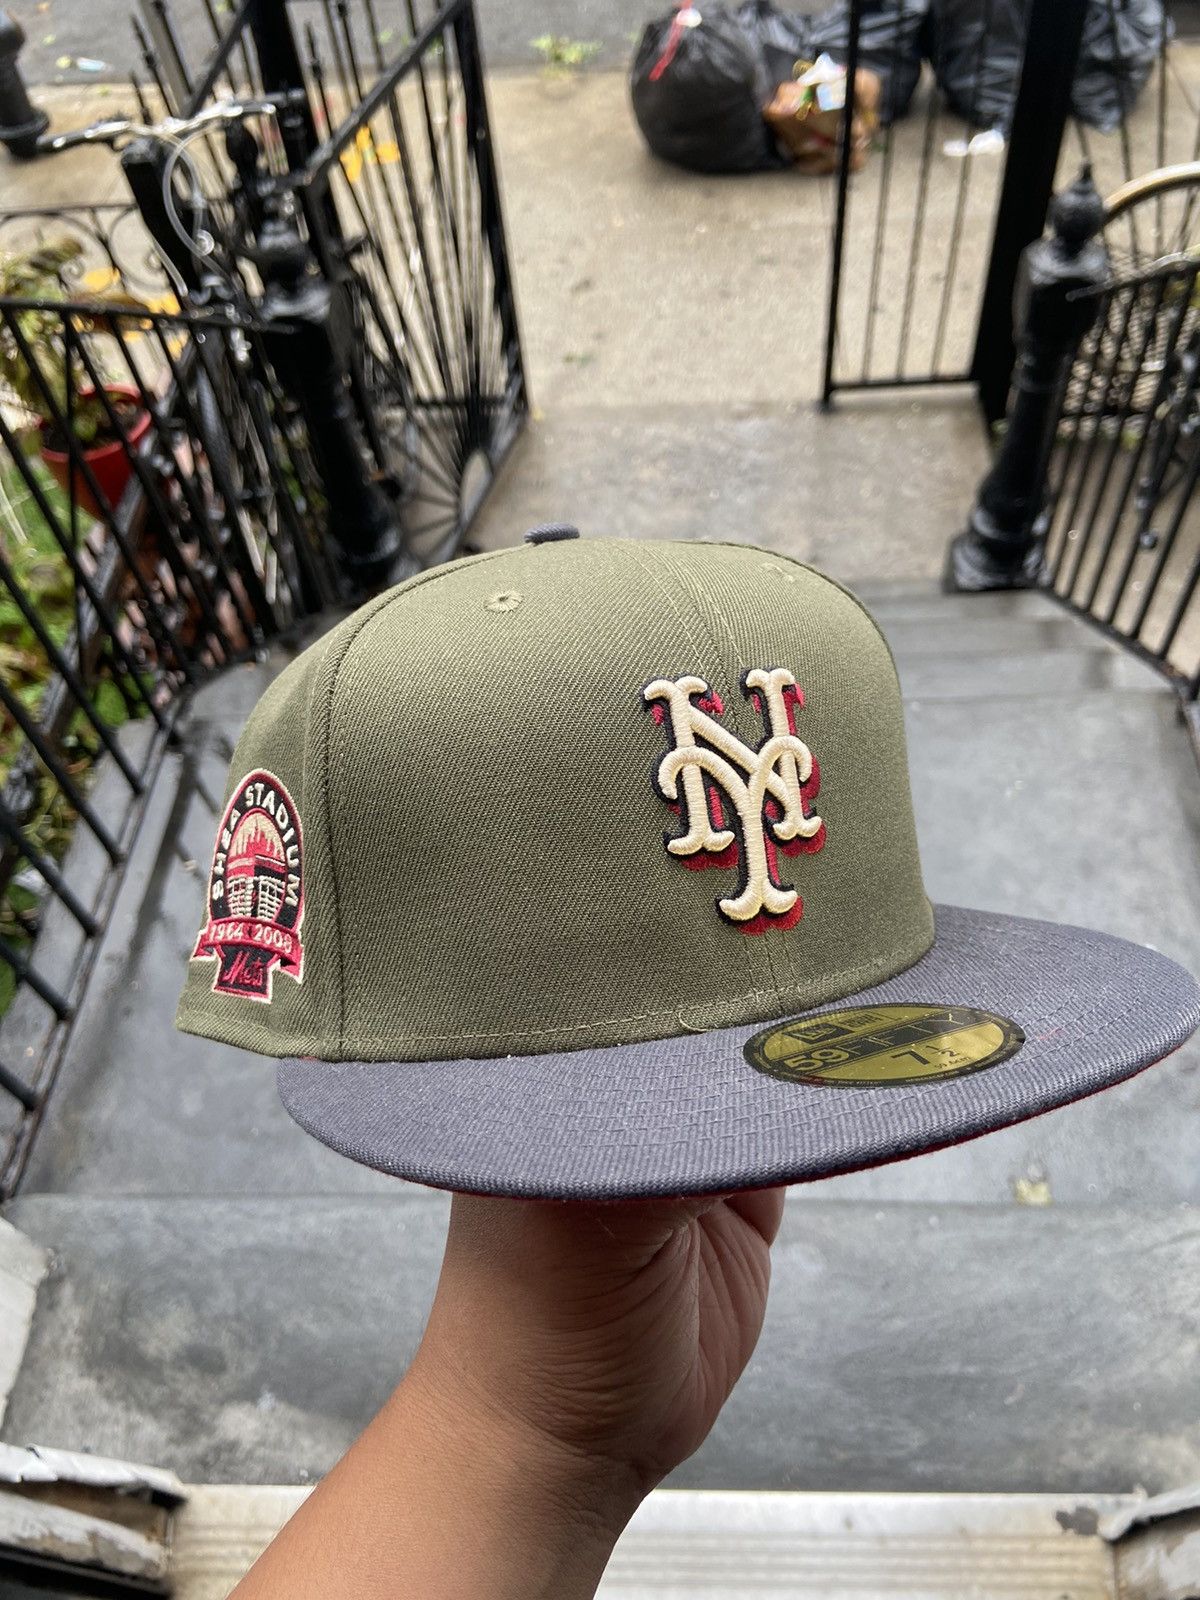 New York Mets Hat Club Fitted Hat